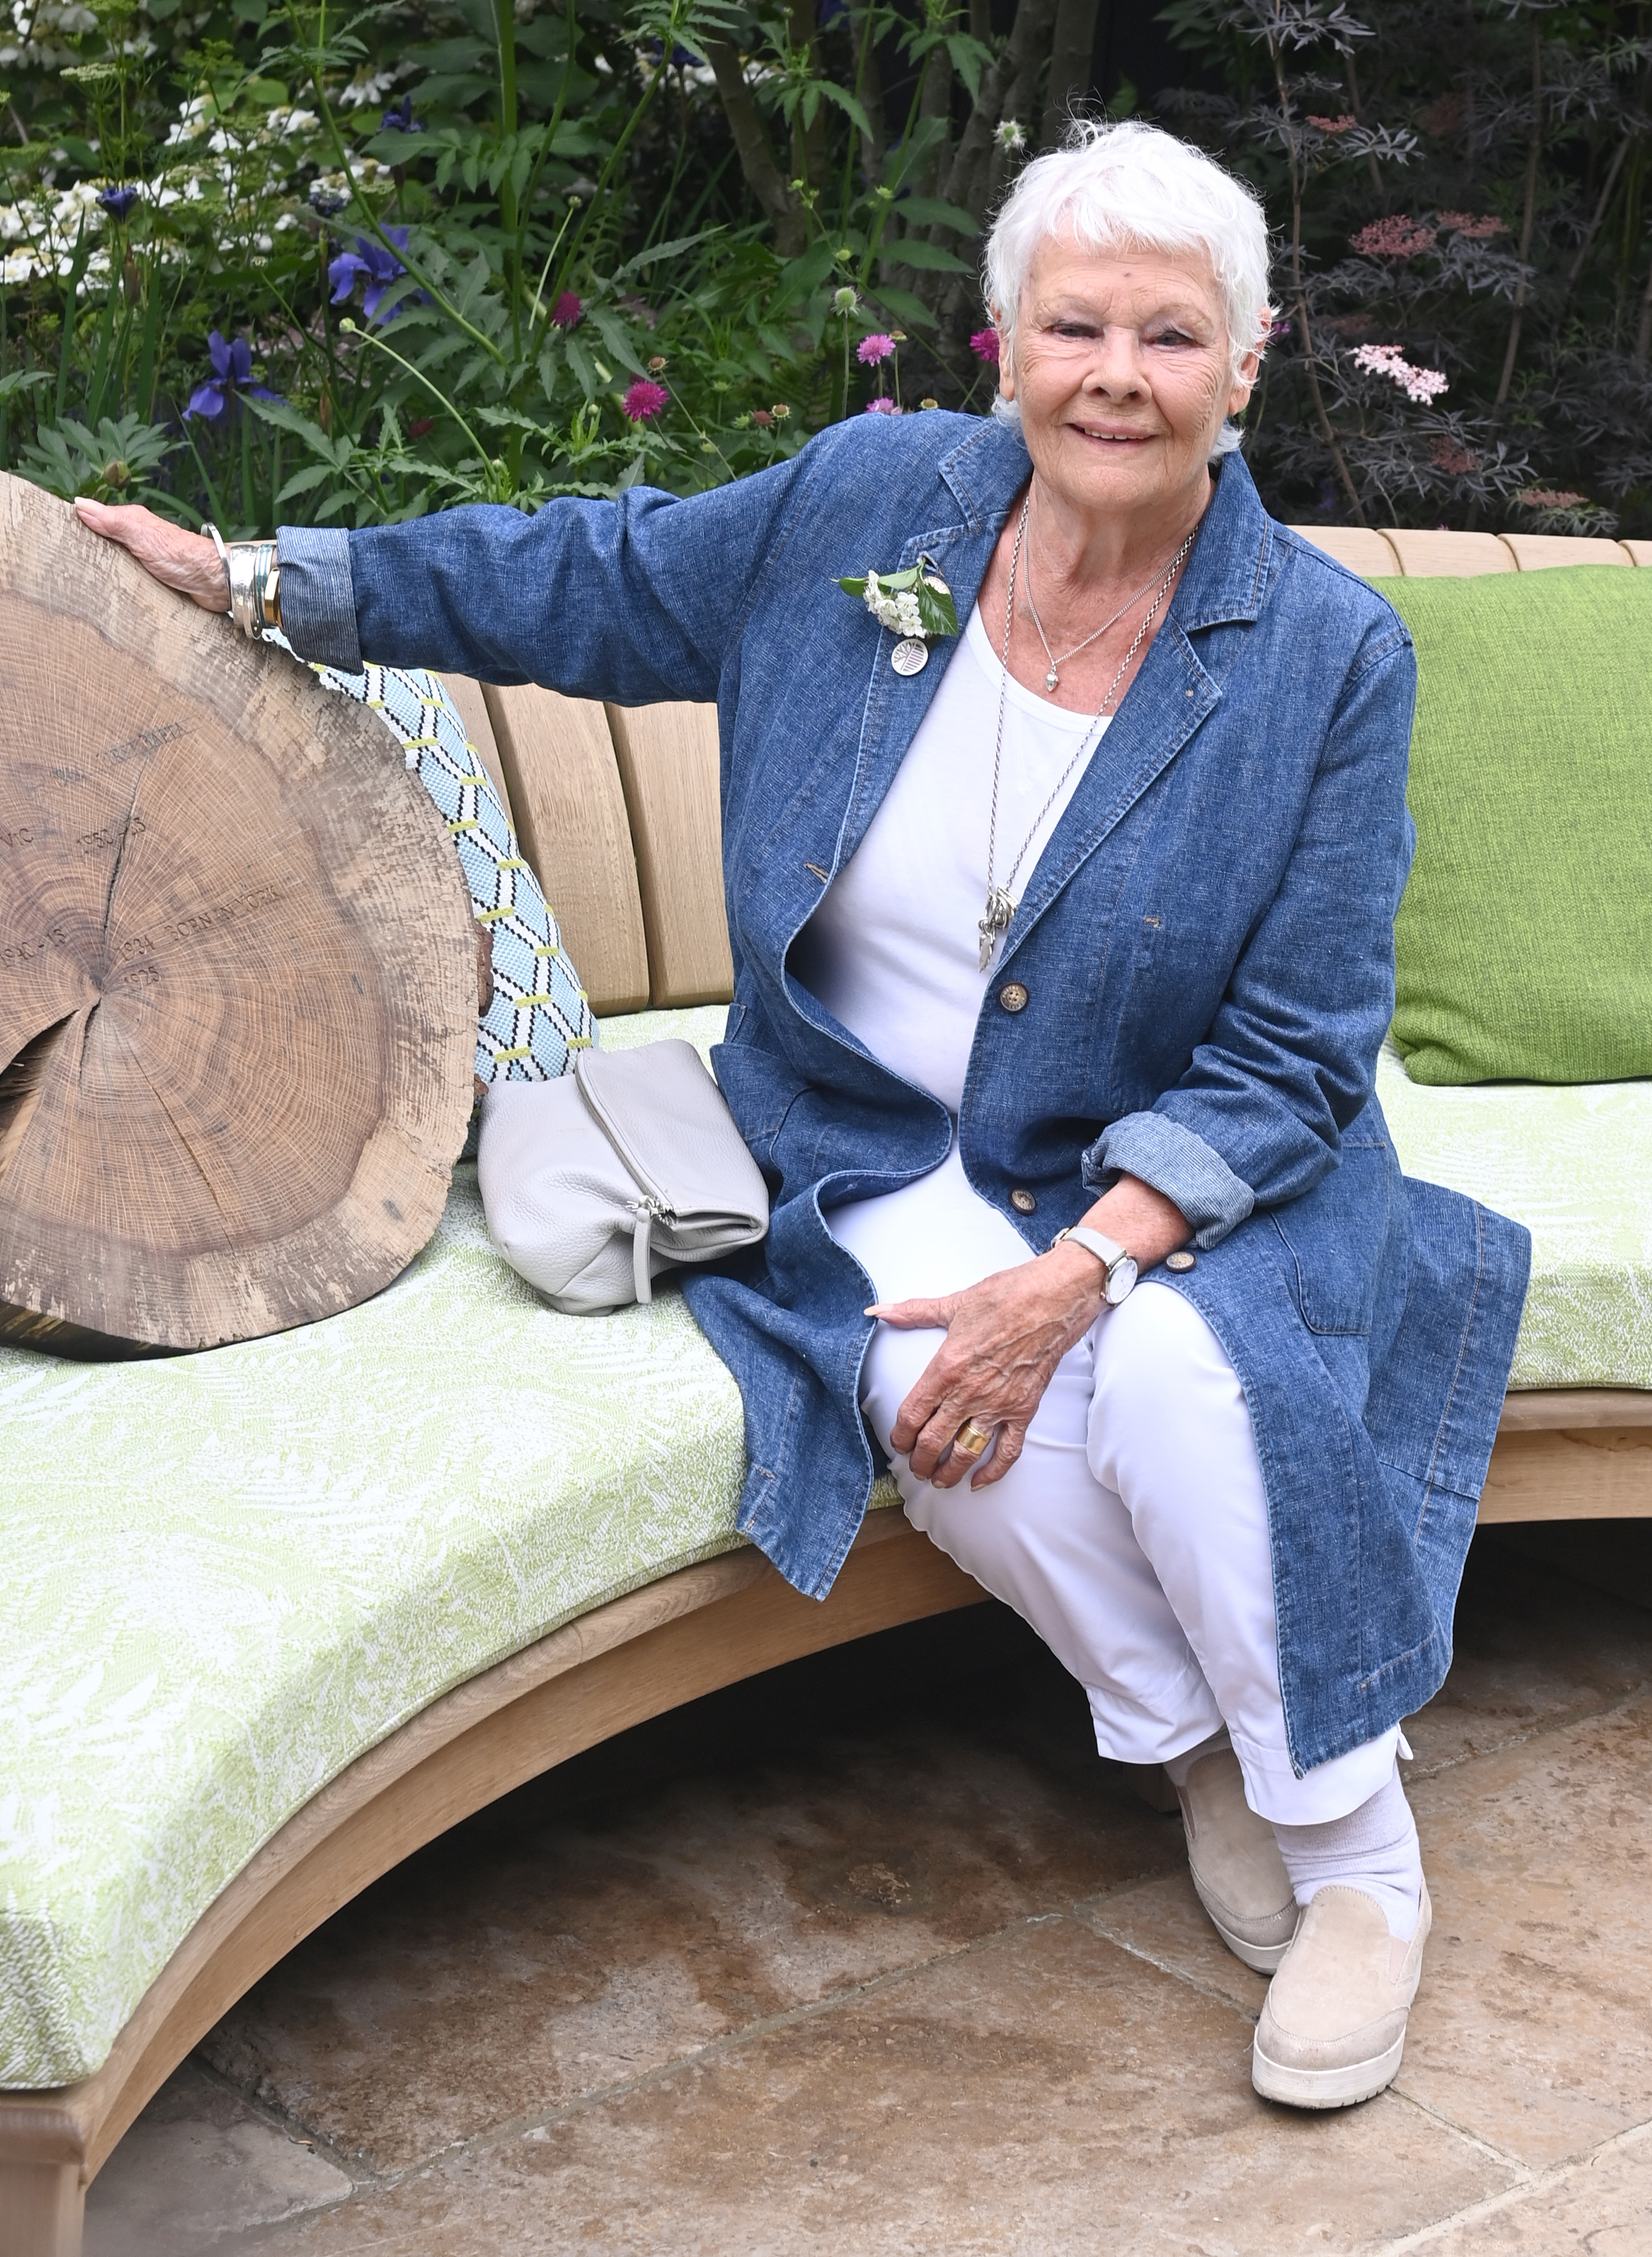 Dame Judi Dench at the RHS Chelsea Flower Show in London, 2022 | Source: Getty Images